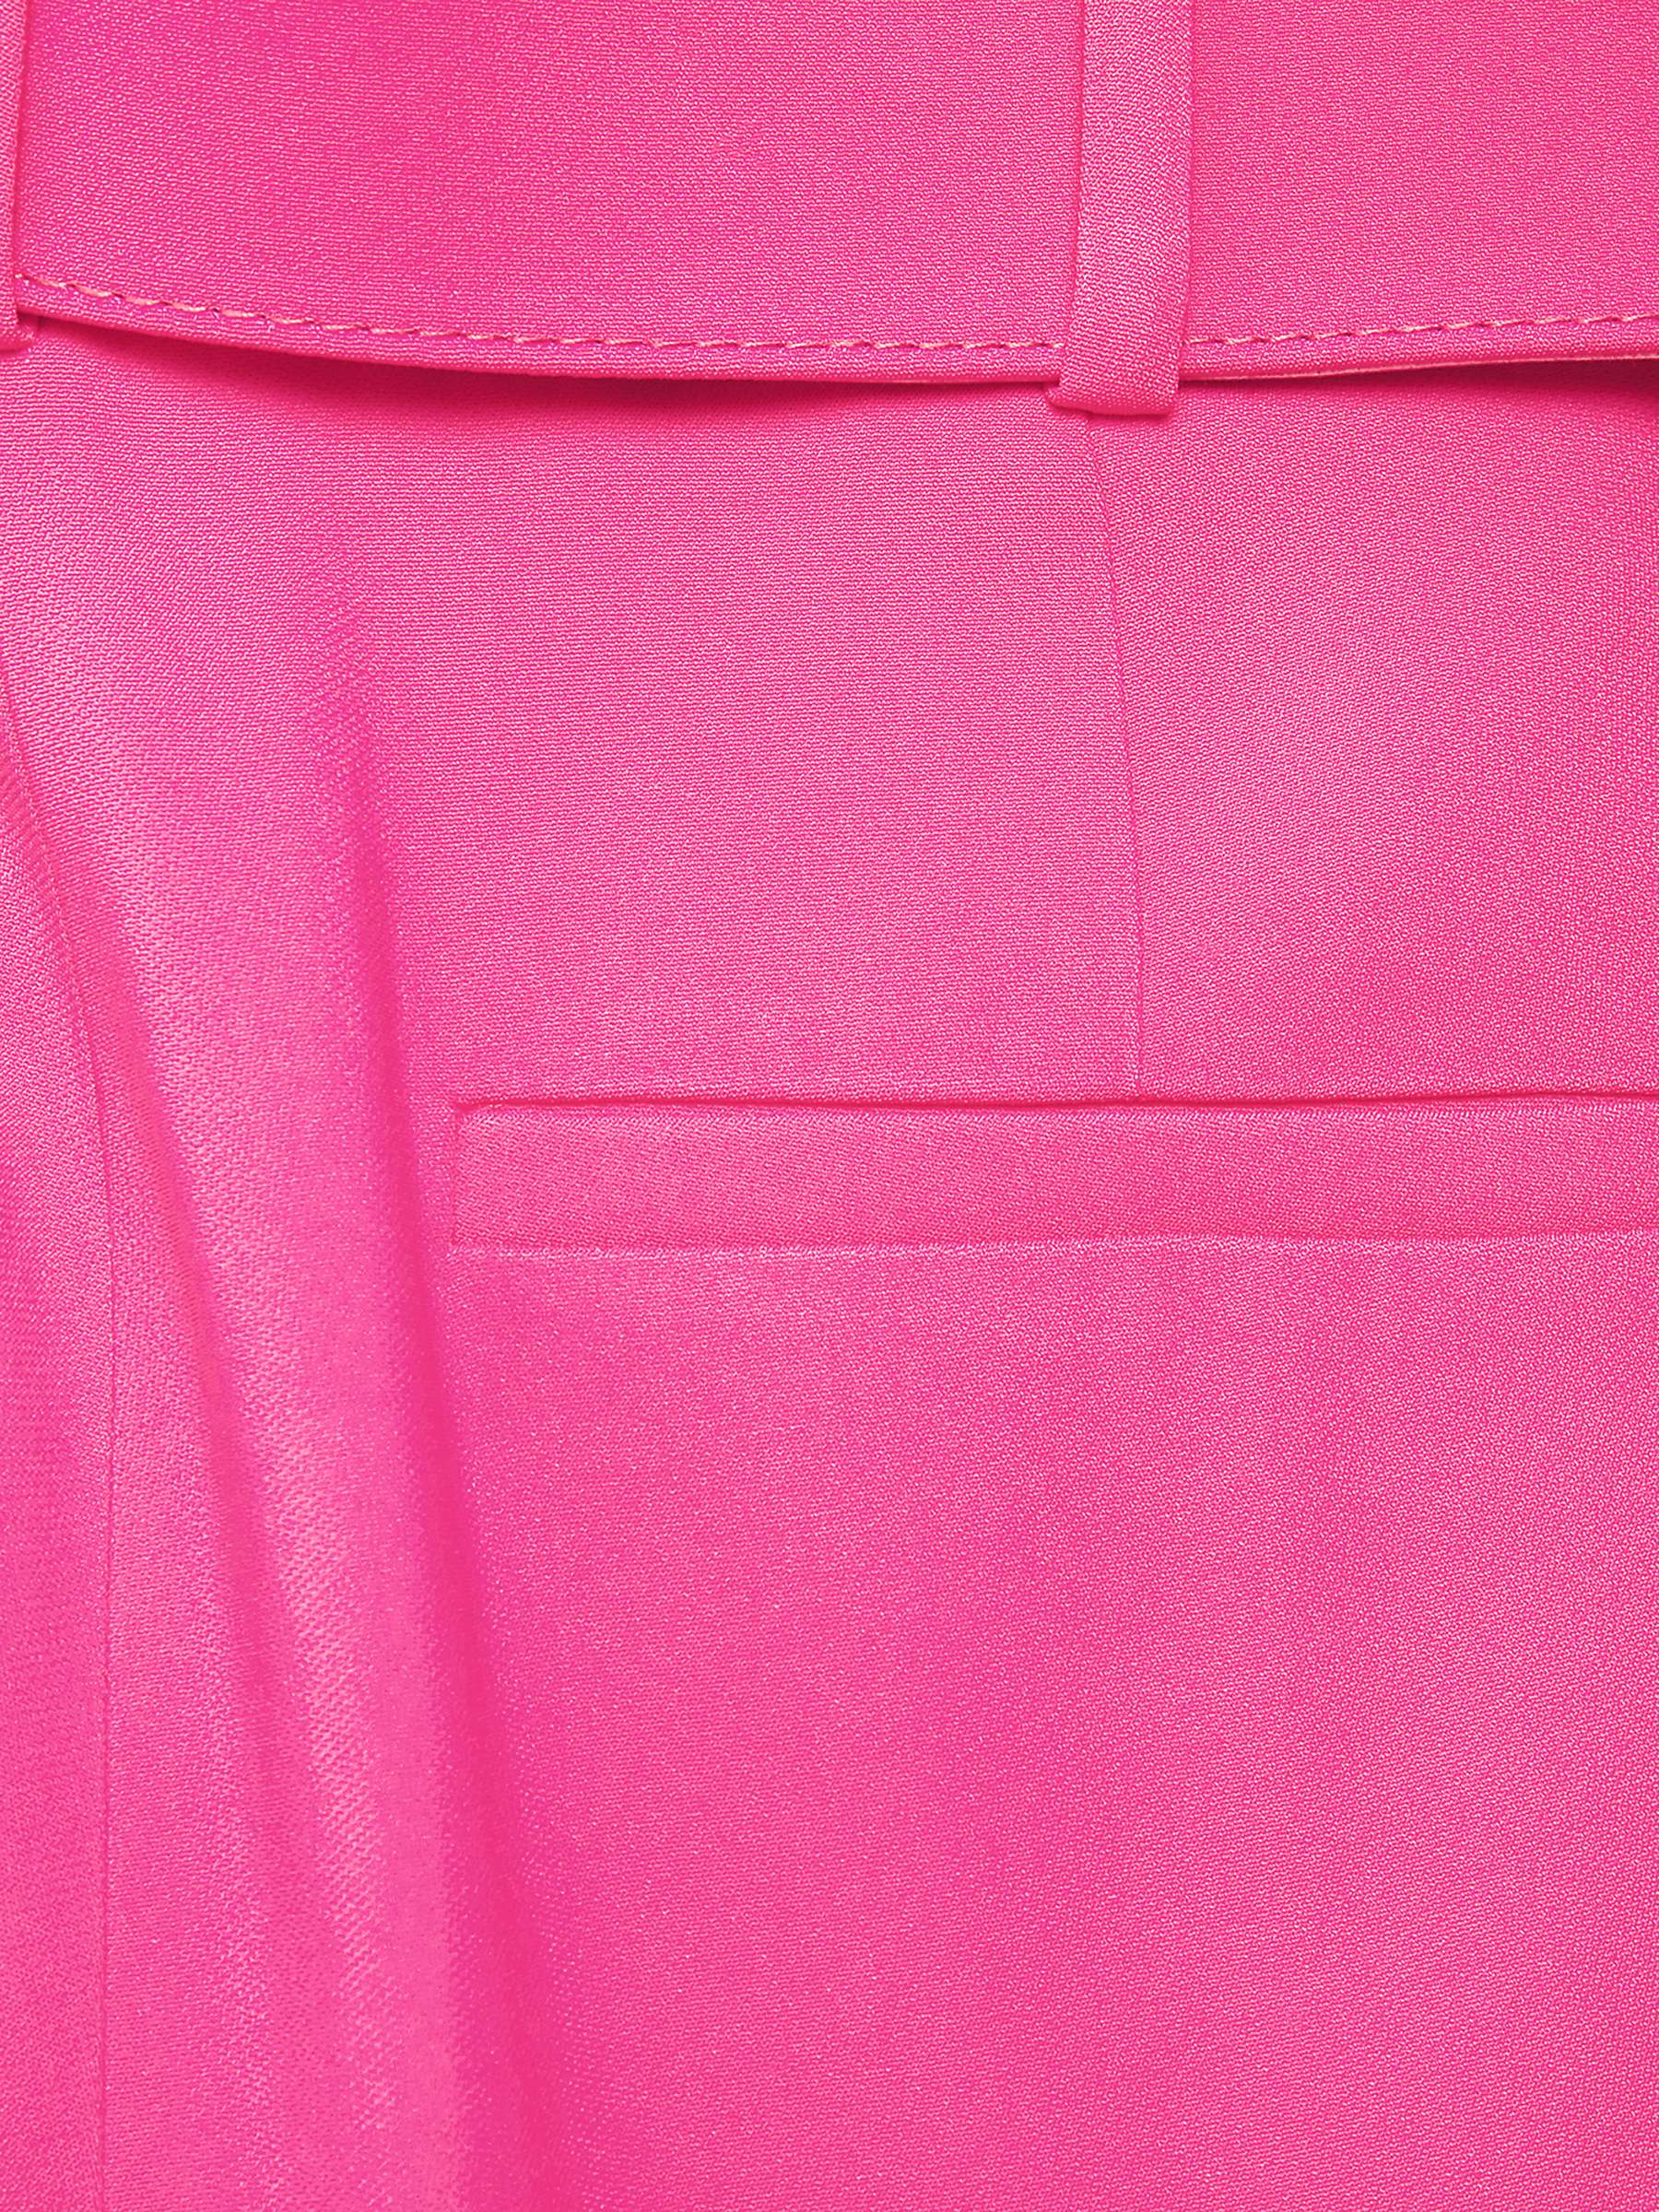 Phase Eight Adria Tailored Belted Trousers, Hot Pink at John Lewis ...